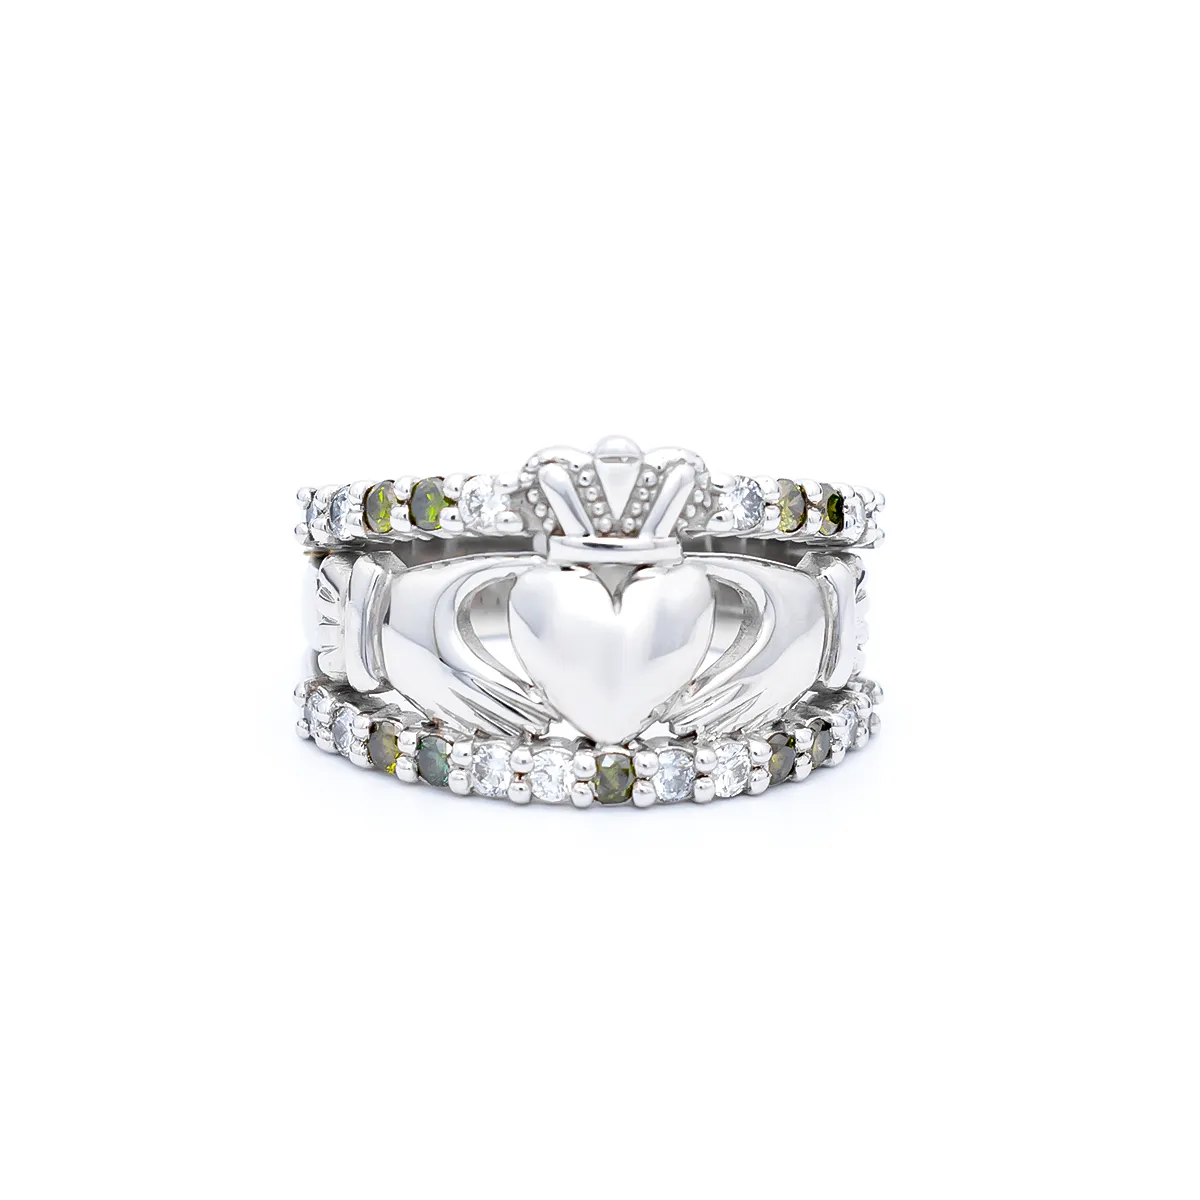 White Gold Claddagh Ring With Green Coloured And White Diamonds 